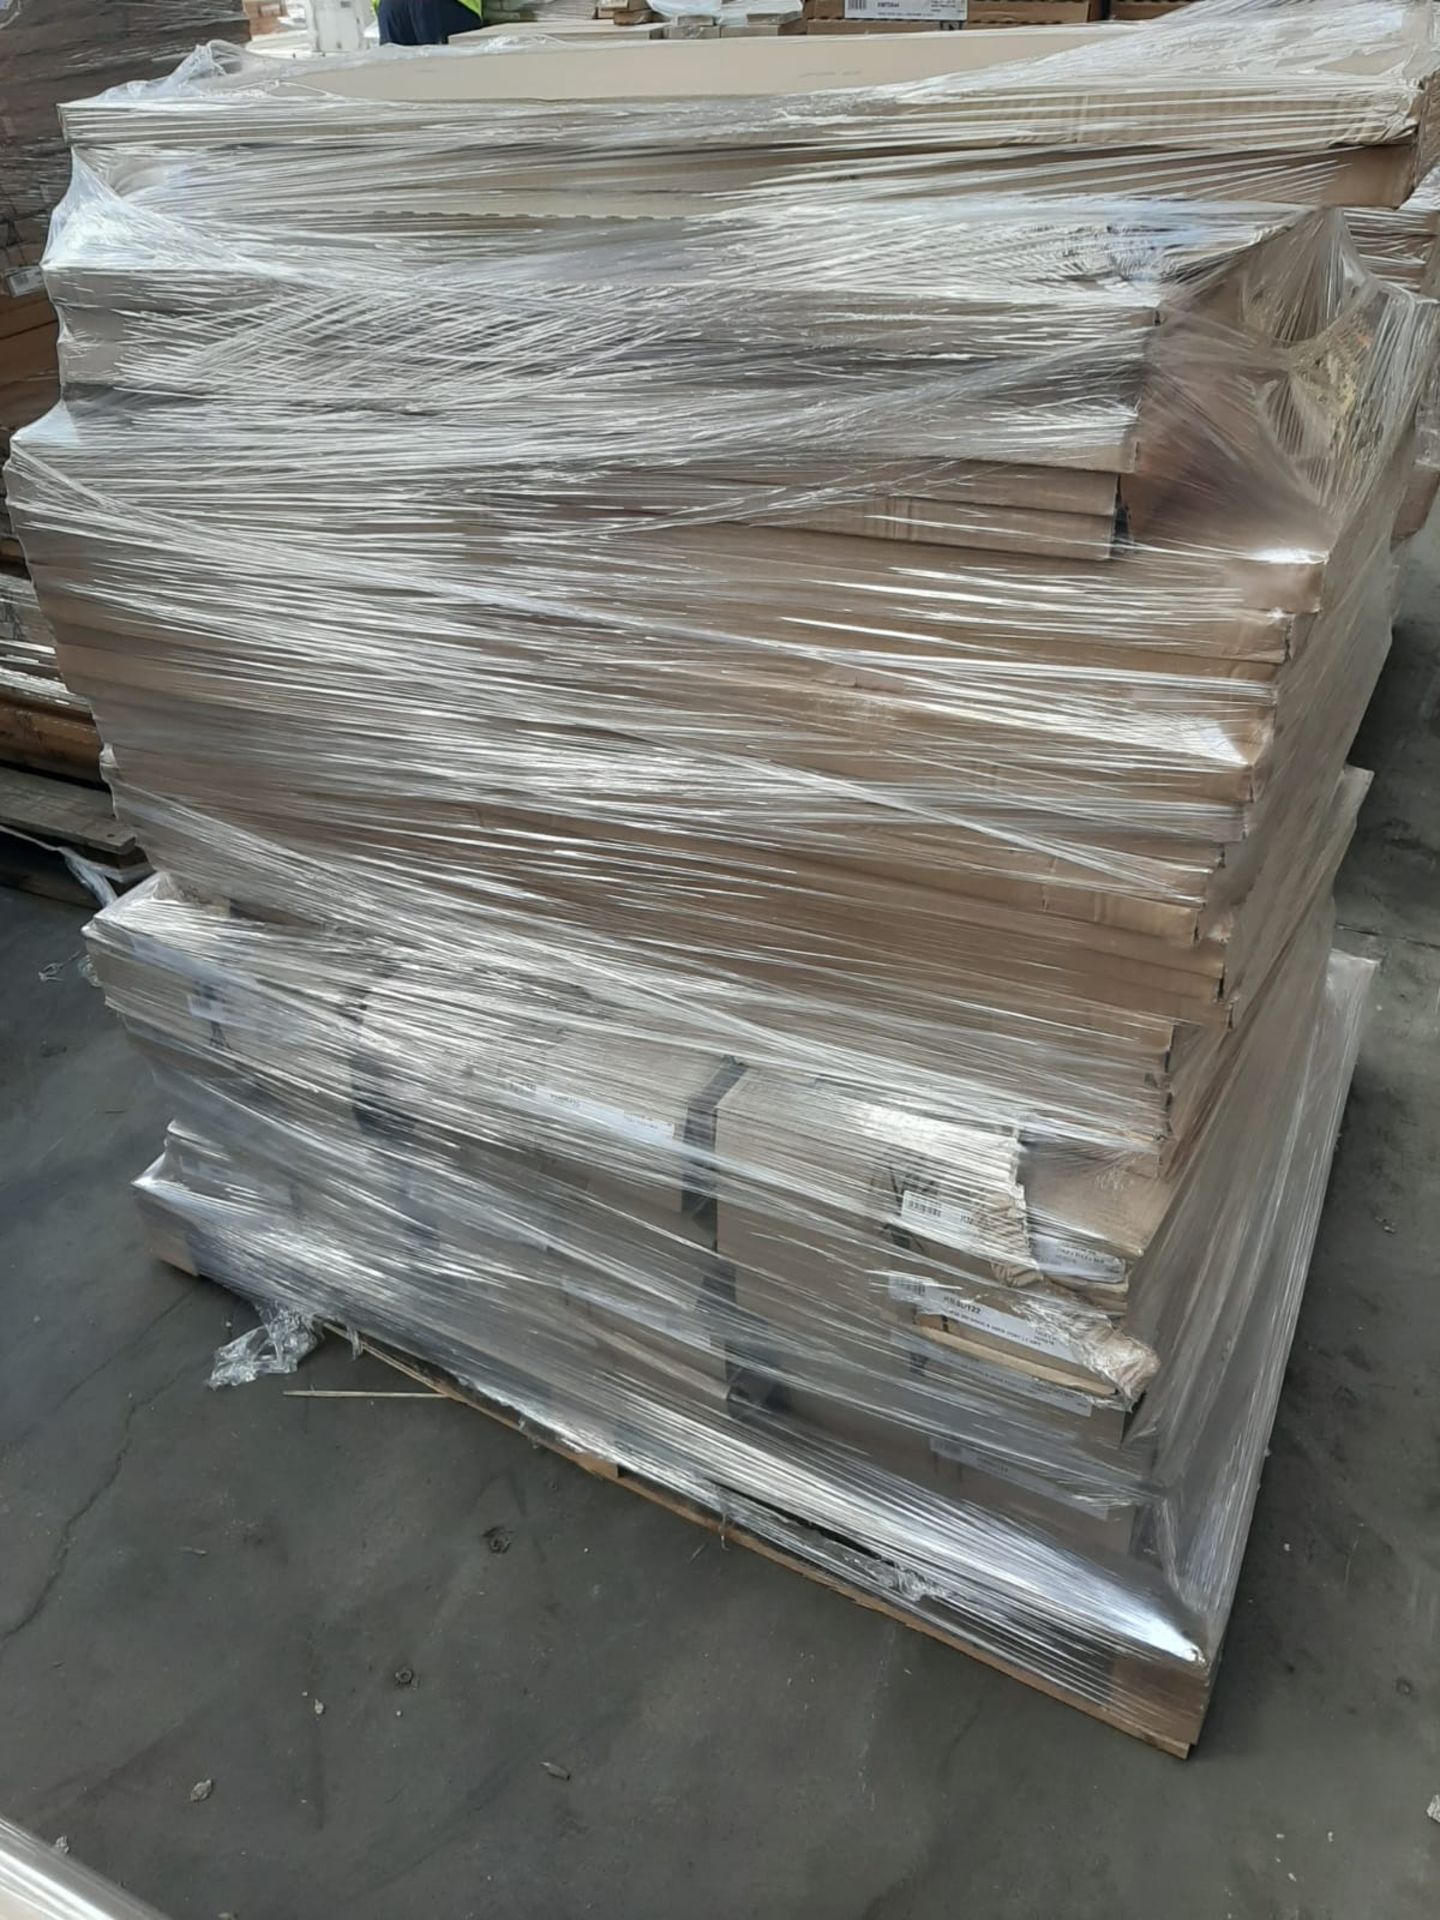 (ED4) PALLET TO CONTAIN 55 ITEMS OF NEW KITCHEN GOODS TO INCLUDE: BI FOLD SLAB DOOR GLOSS WHITE, - Image 3 of 3